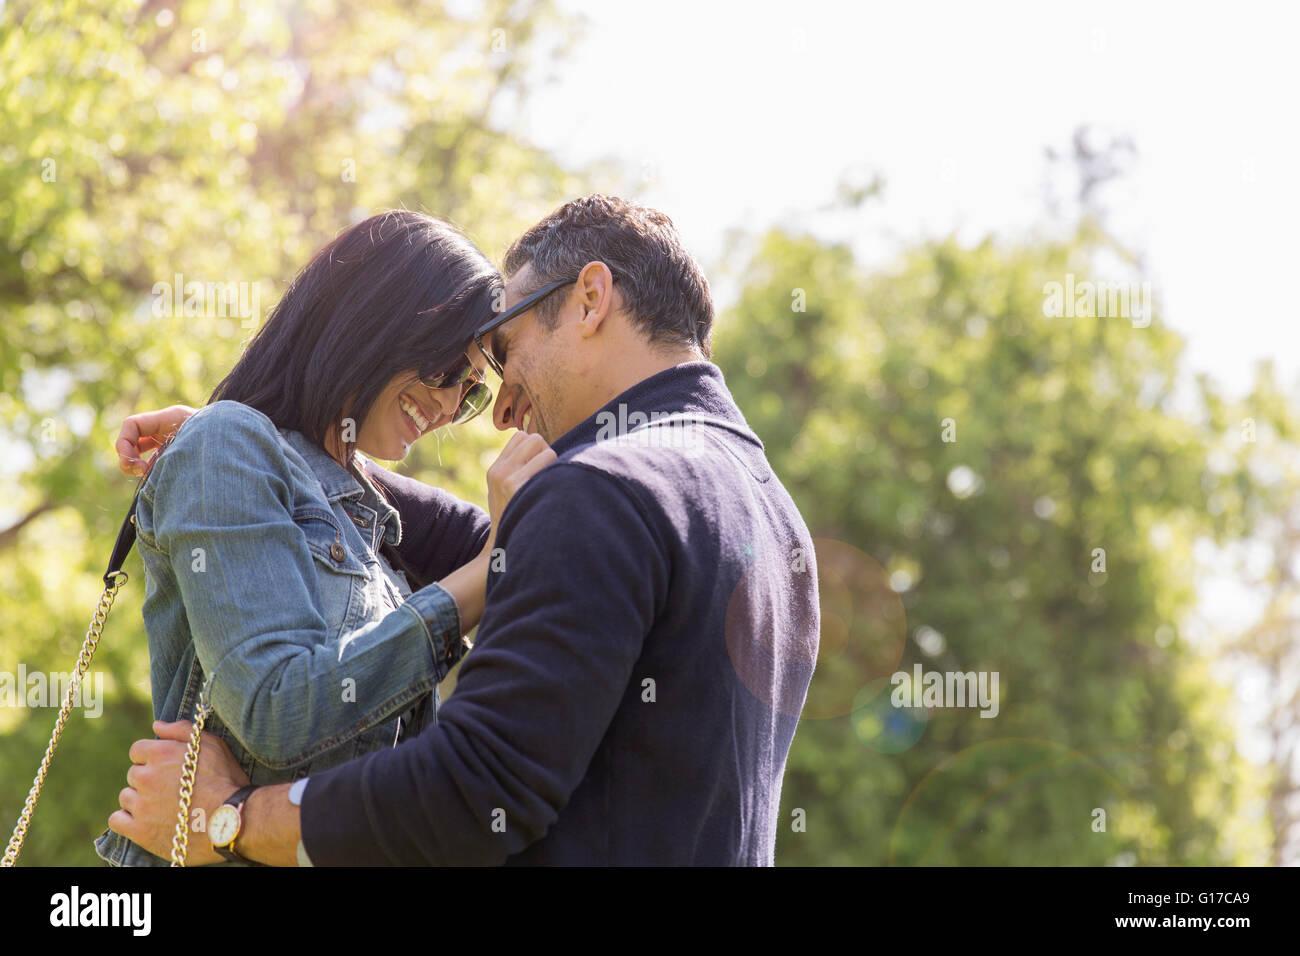 Couple in park face to face hugging and smiling Stock Photo